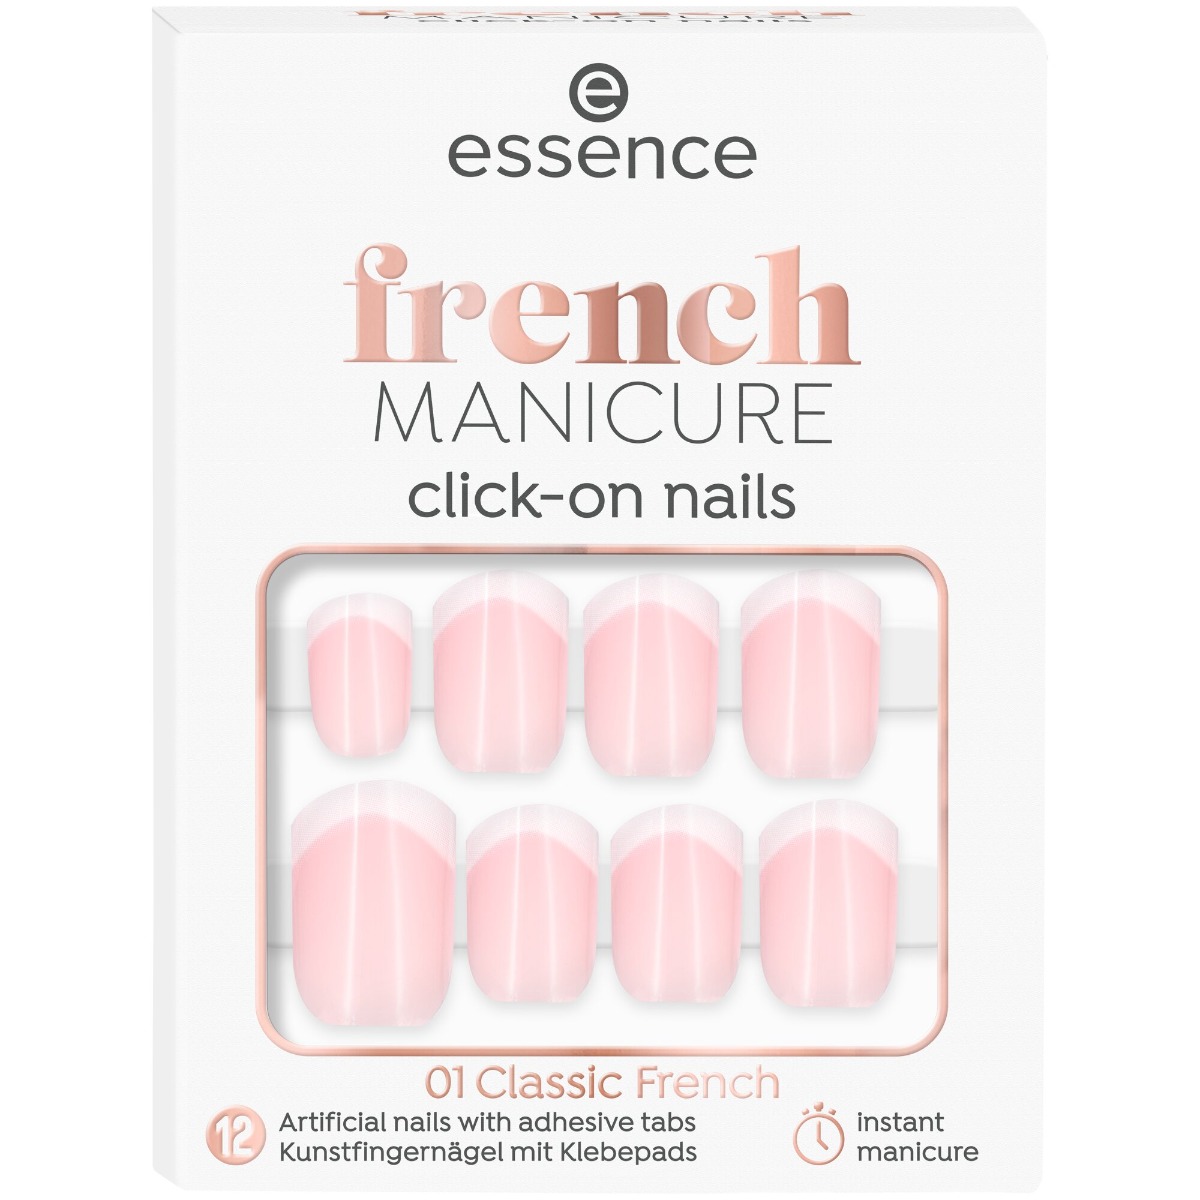 Unghii false french manicure click-on nails 01 - Classic French, 12 bucati, Essence